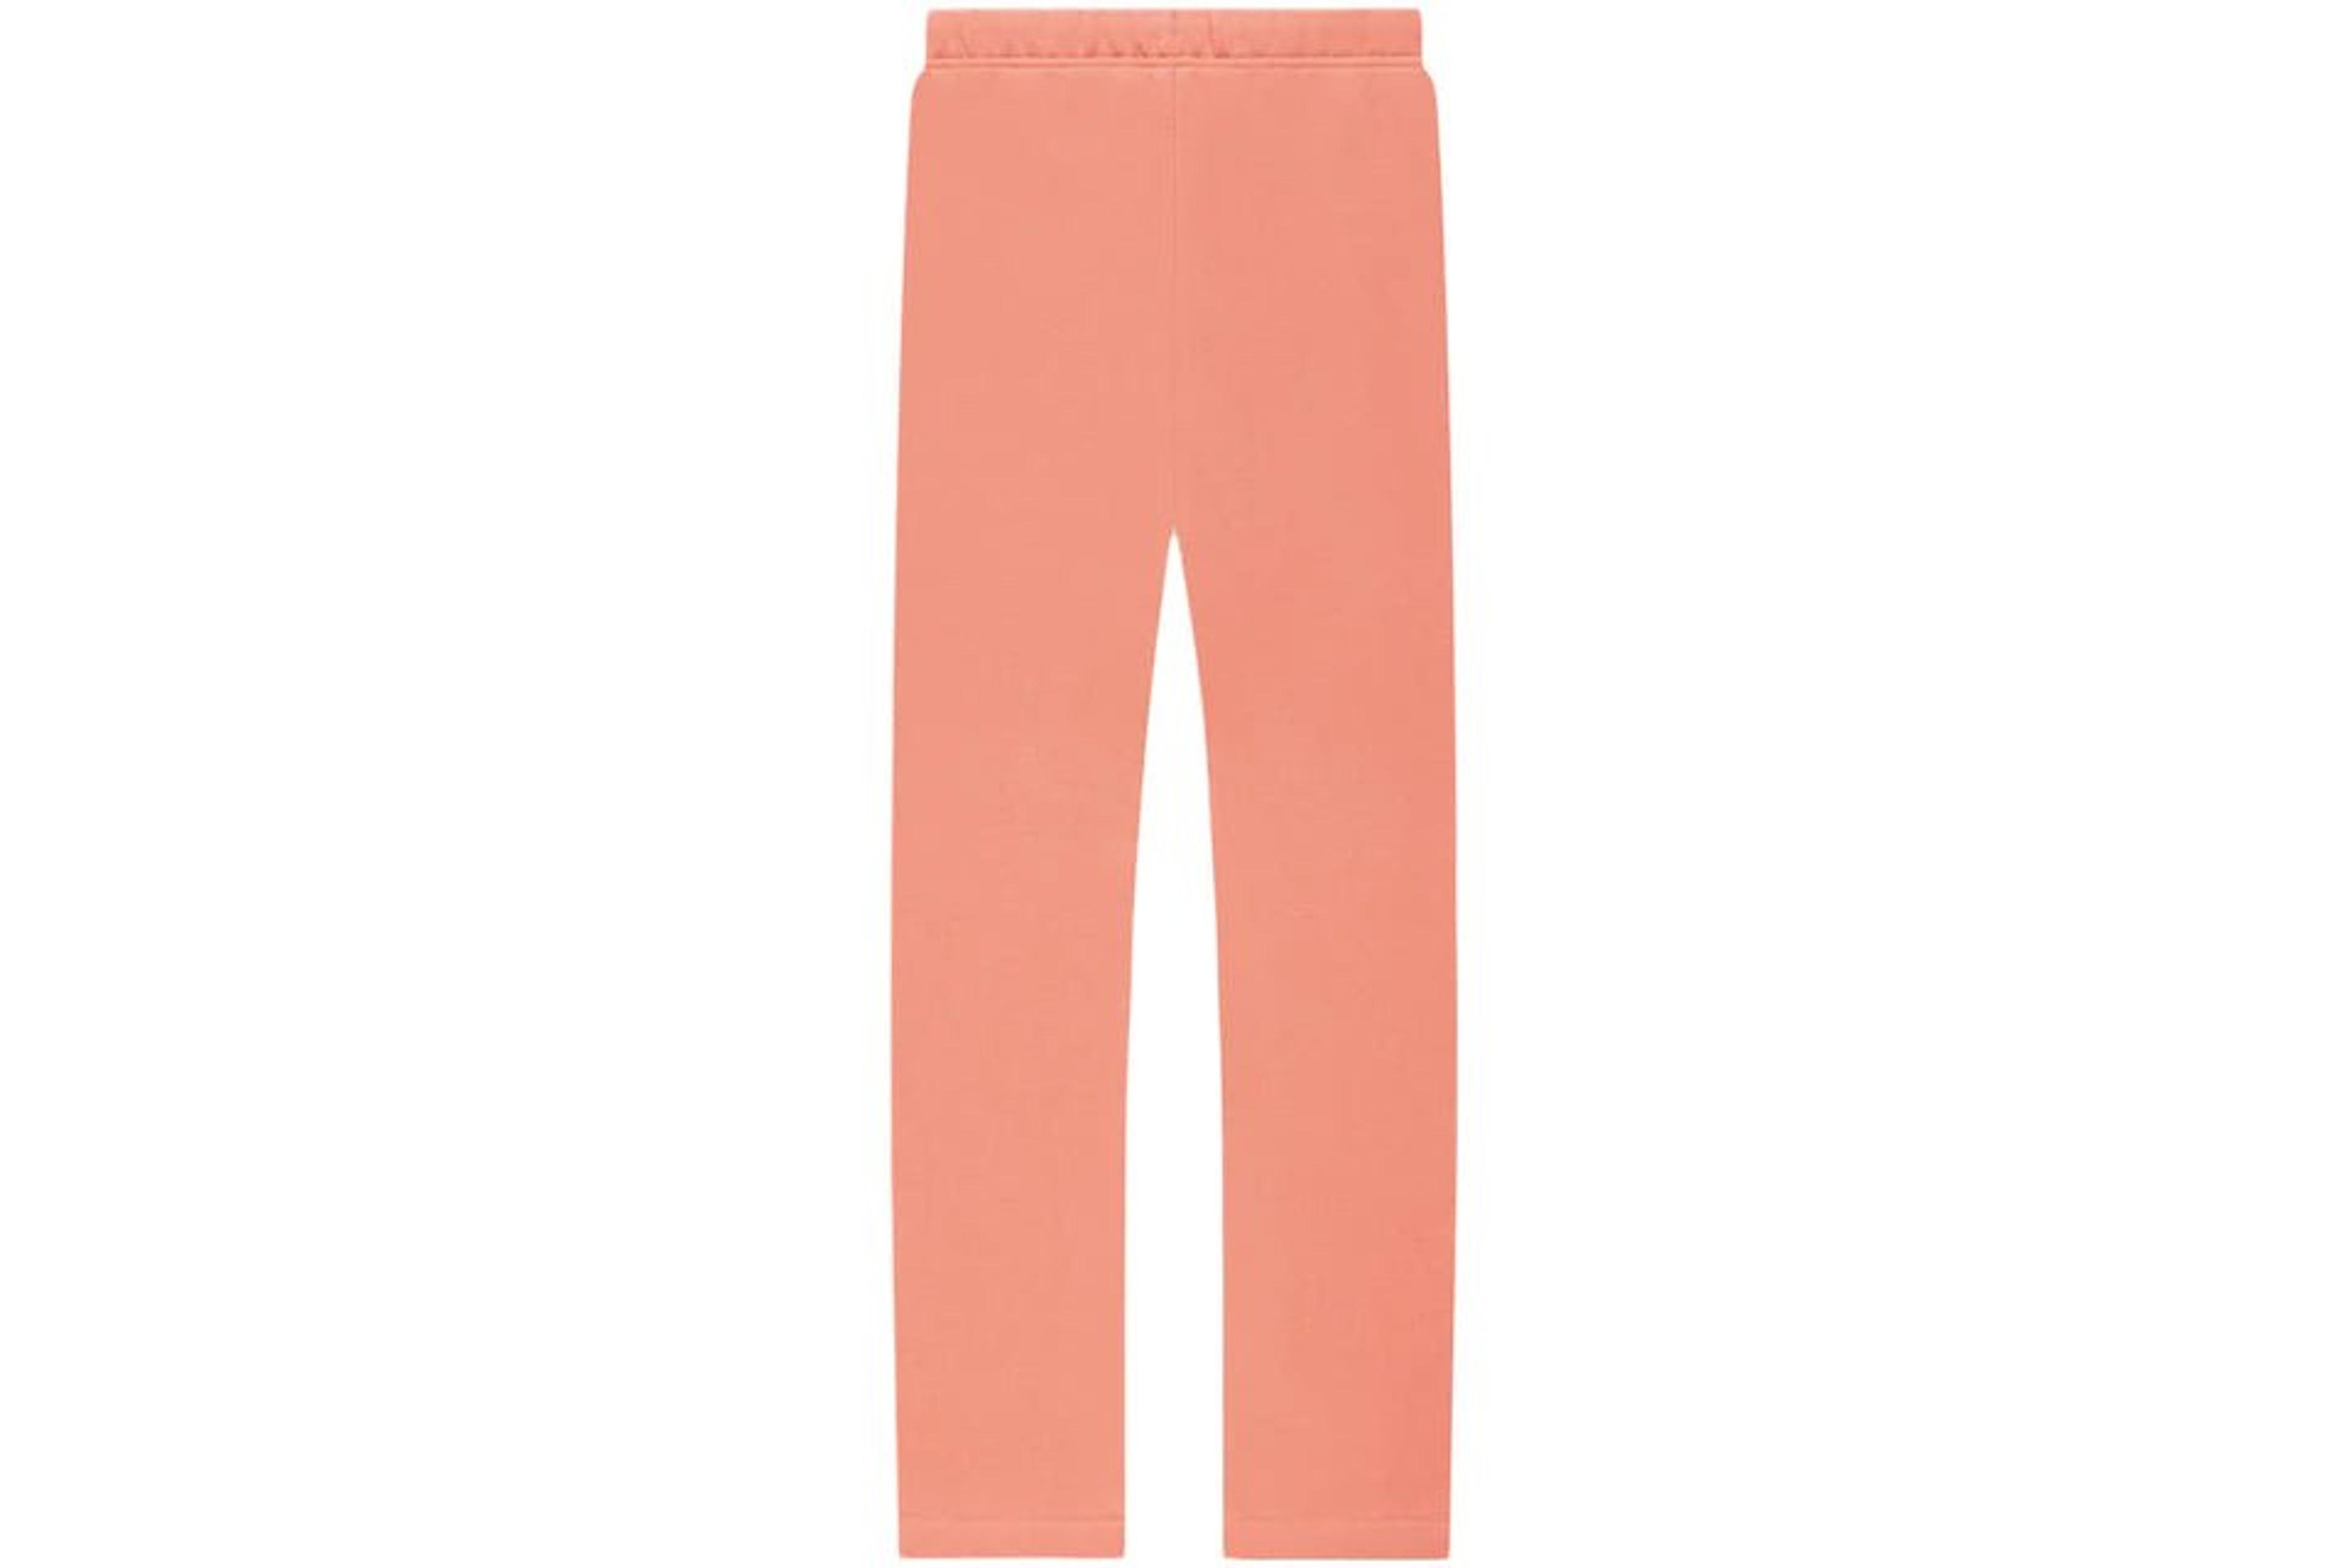 Alternate View 1 of Kids Fear of God Essentials Relaxed Sweatpant Coral